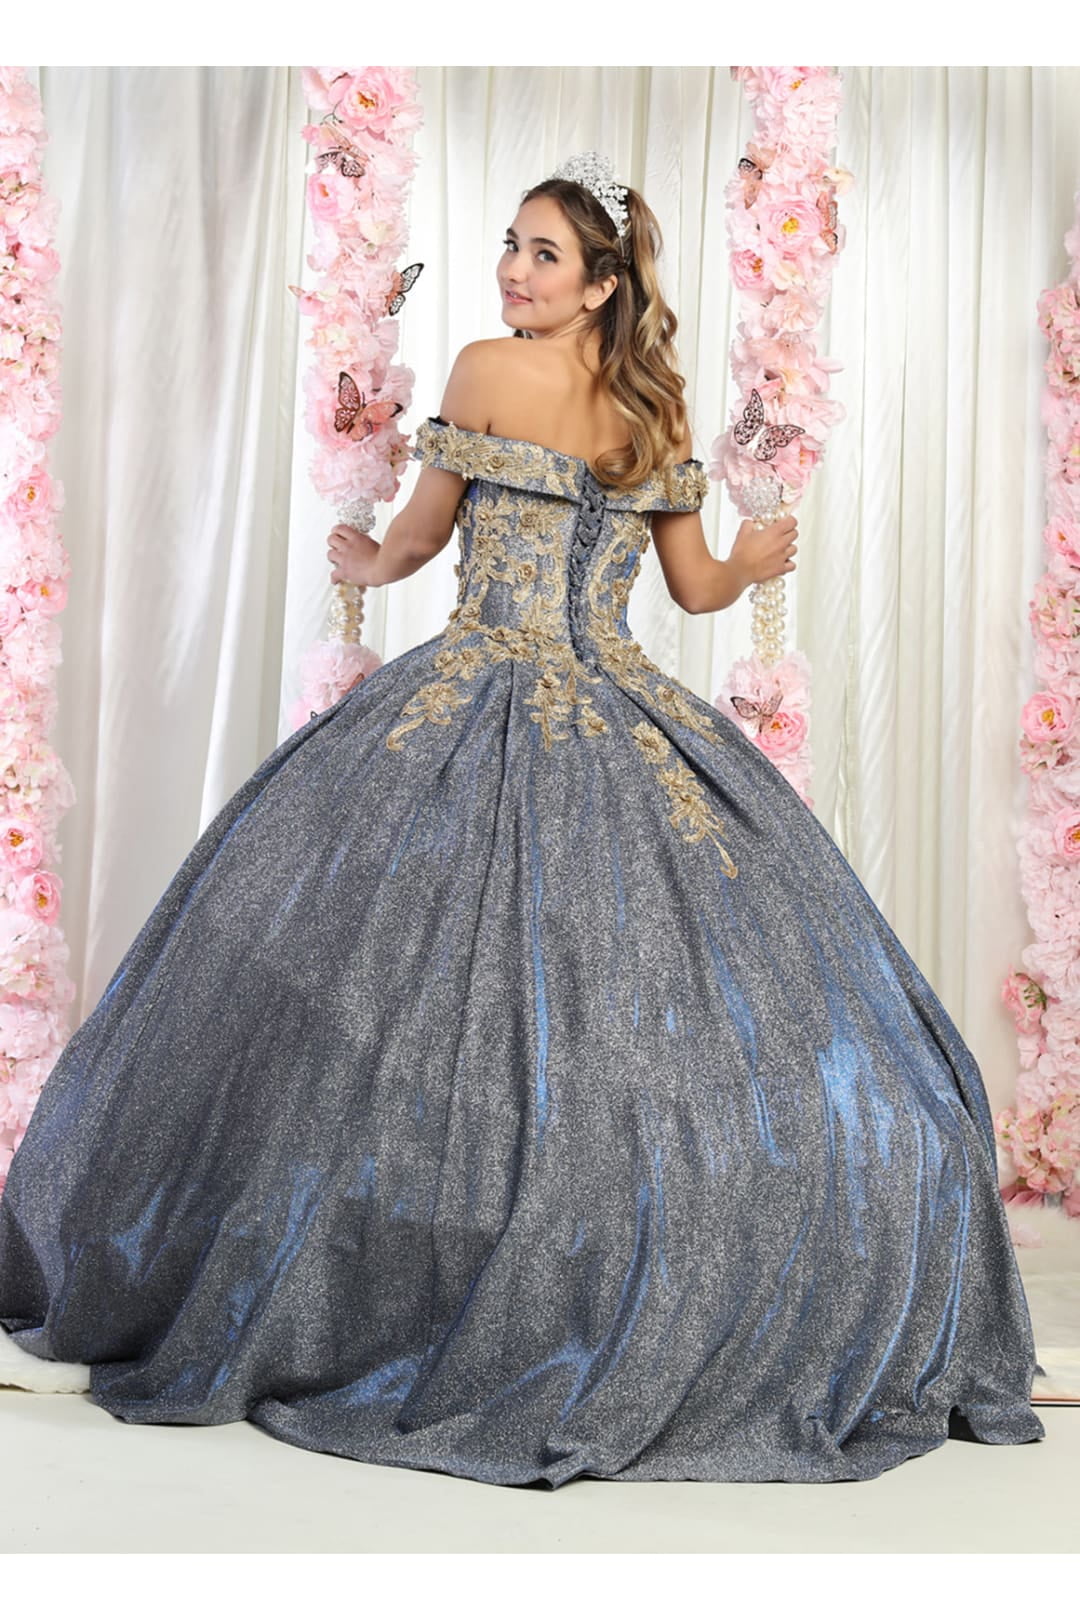 dress for quincea帽era